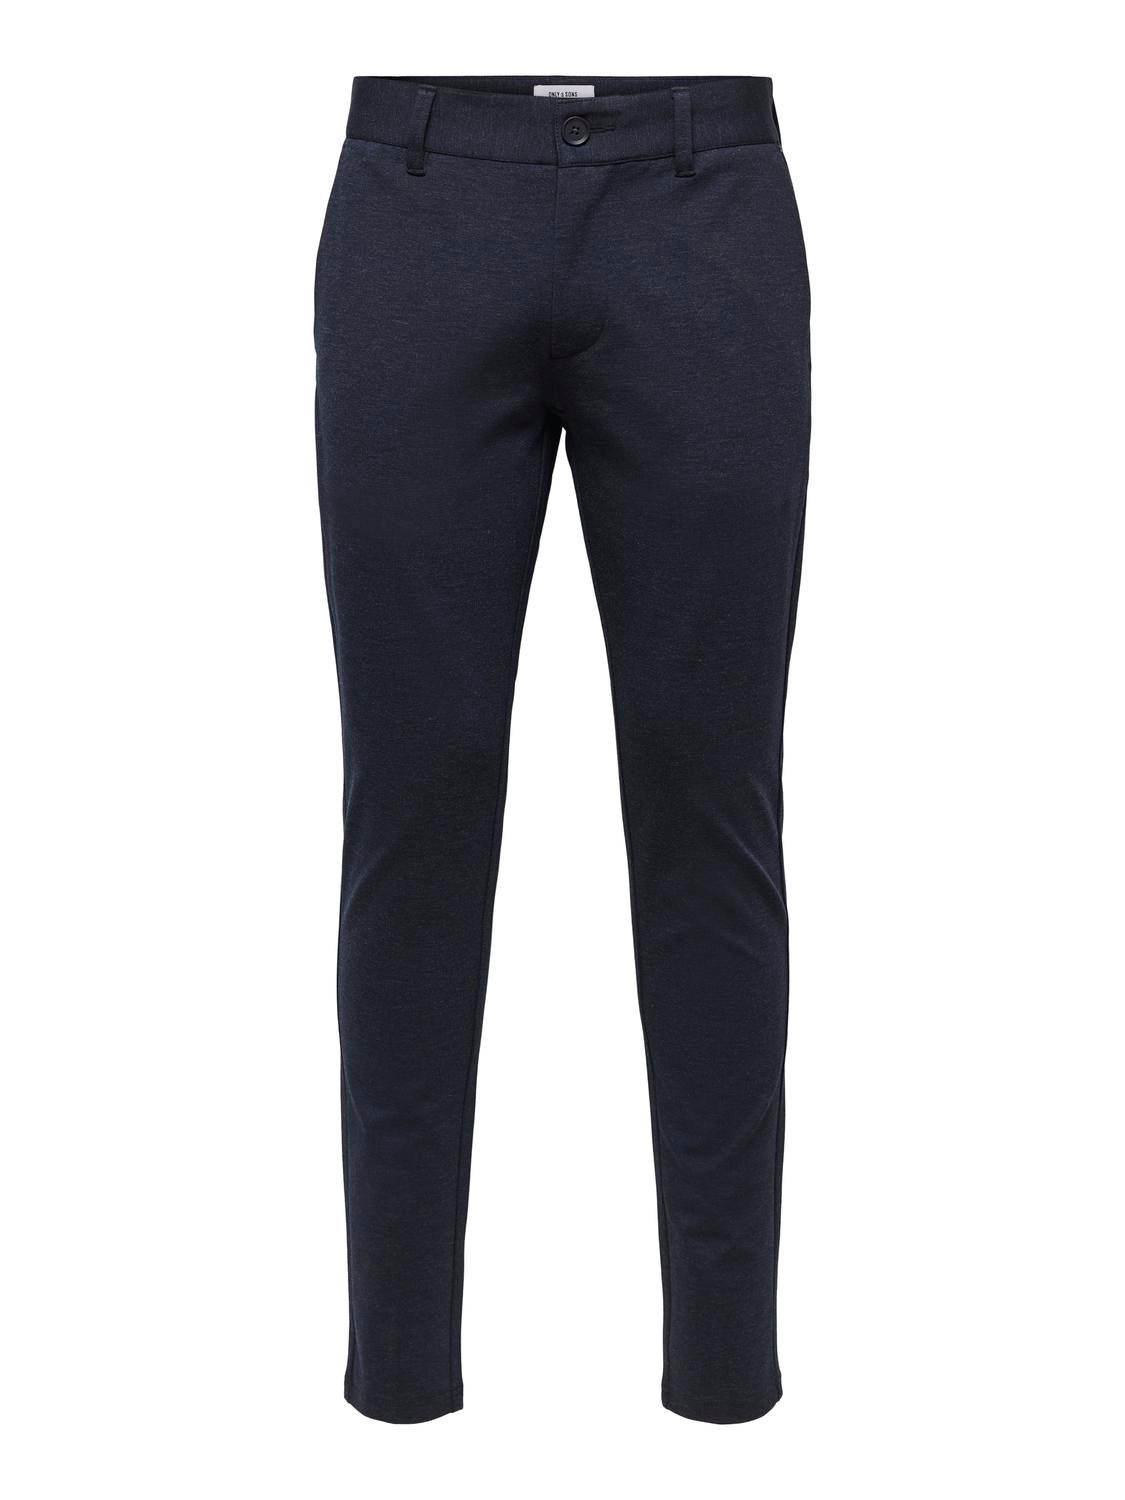 Only & Sons Mark Heathered Ponte Pant Slim Fit in Blue for Men